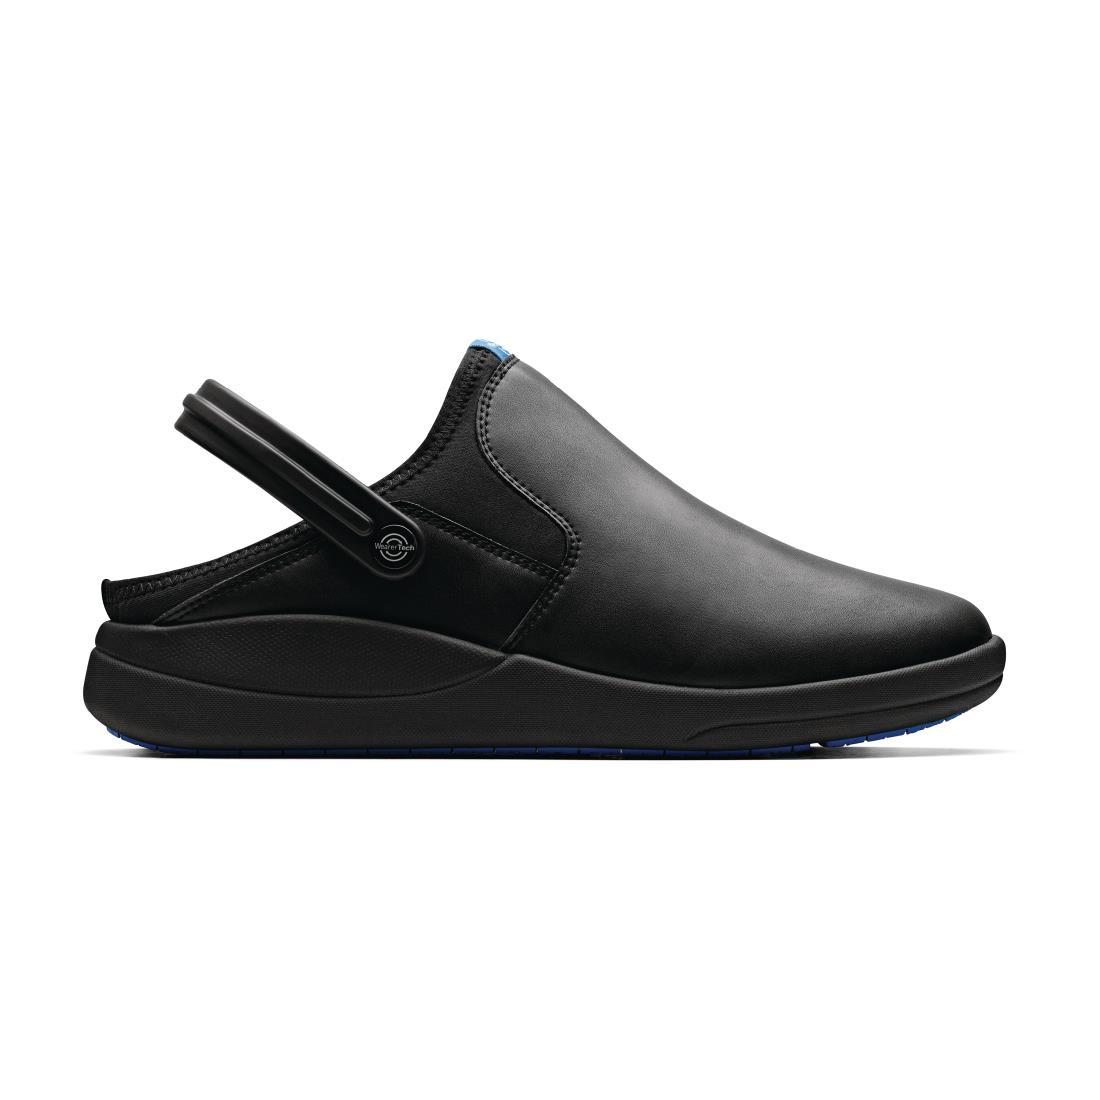 WearerTech Refresh Clog Black with Firm Insoles Size 39-40 - BB556-6  - 3